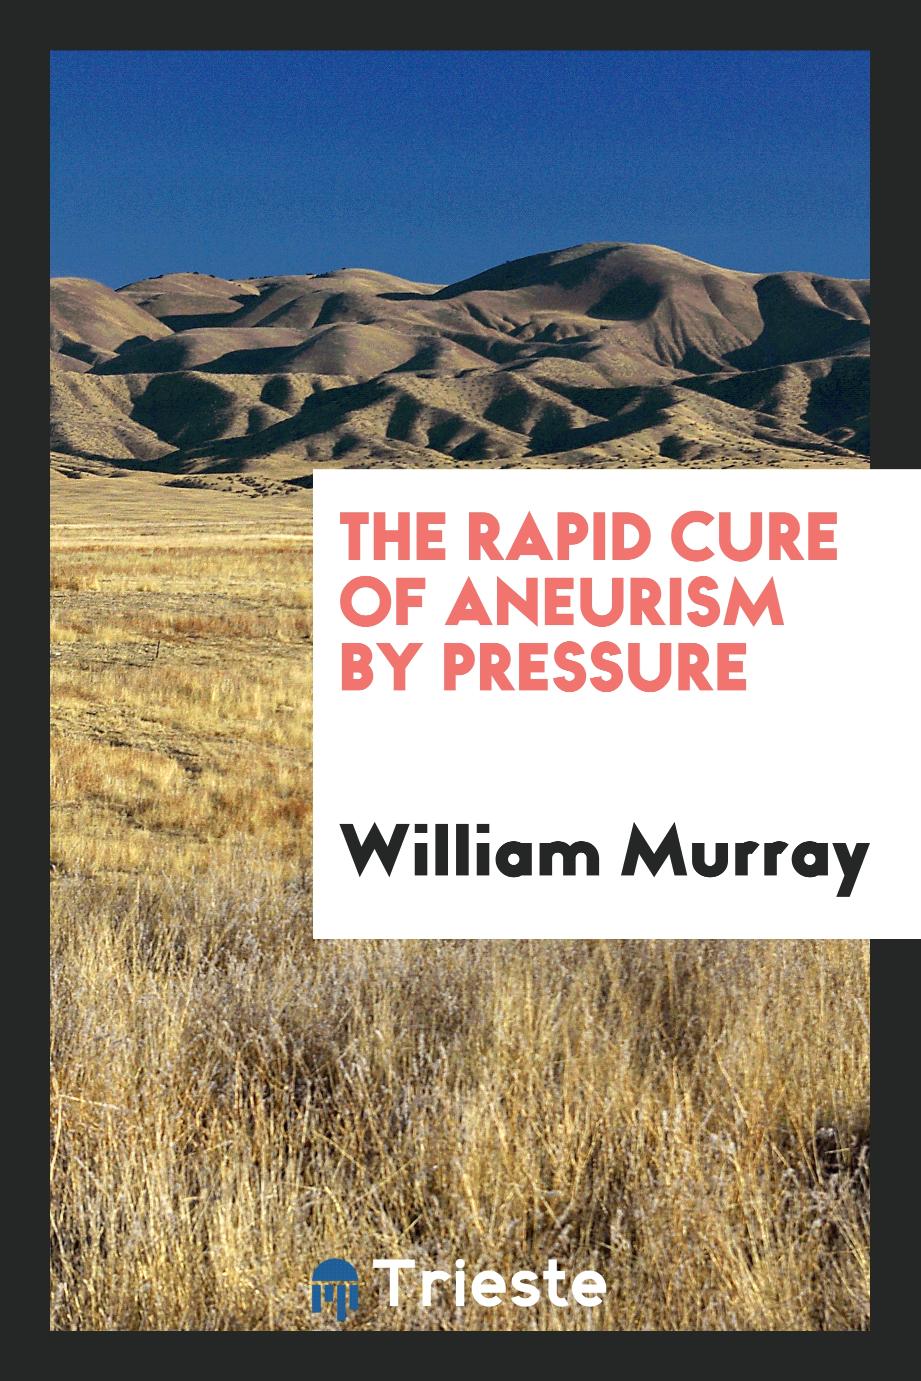 The rapid cure of aneurism by pressure